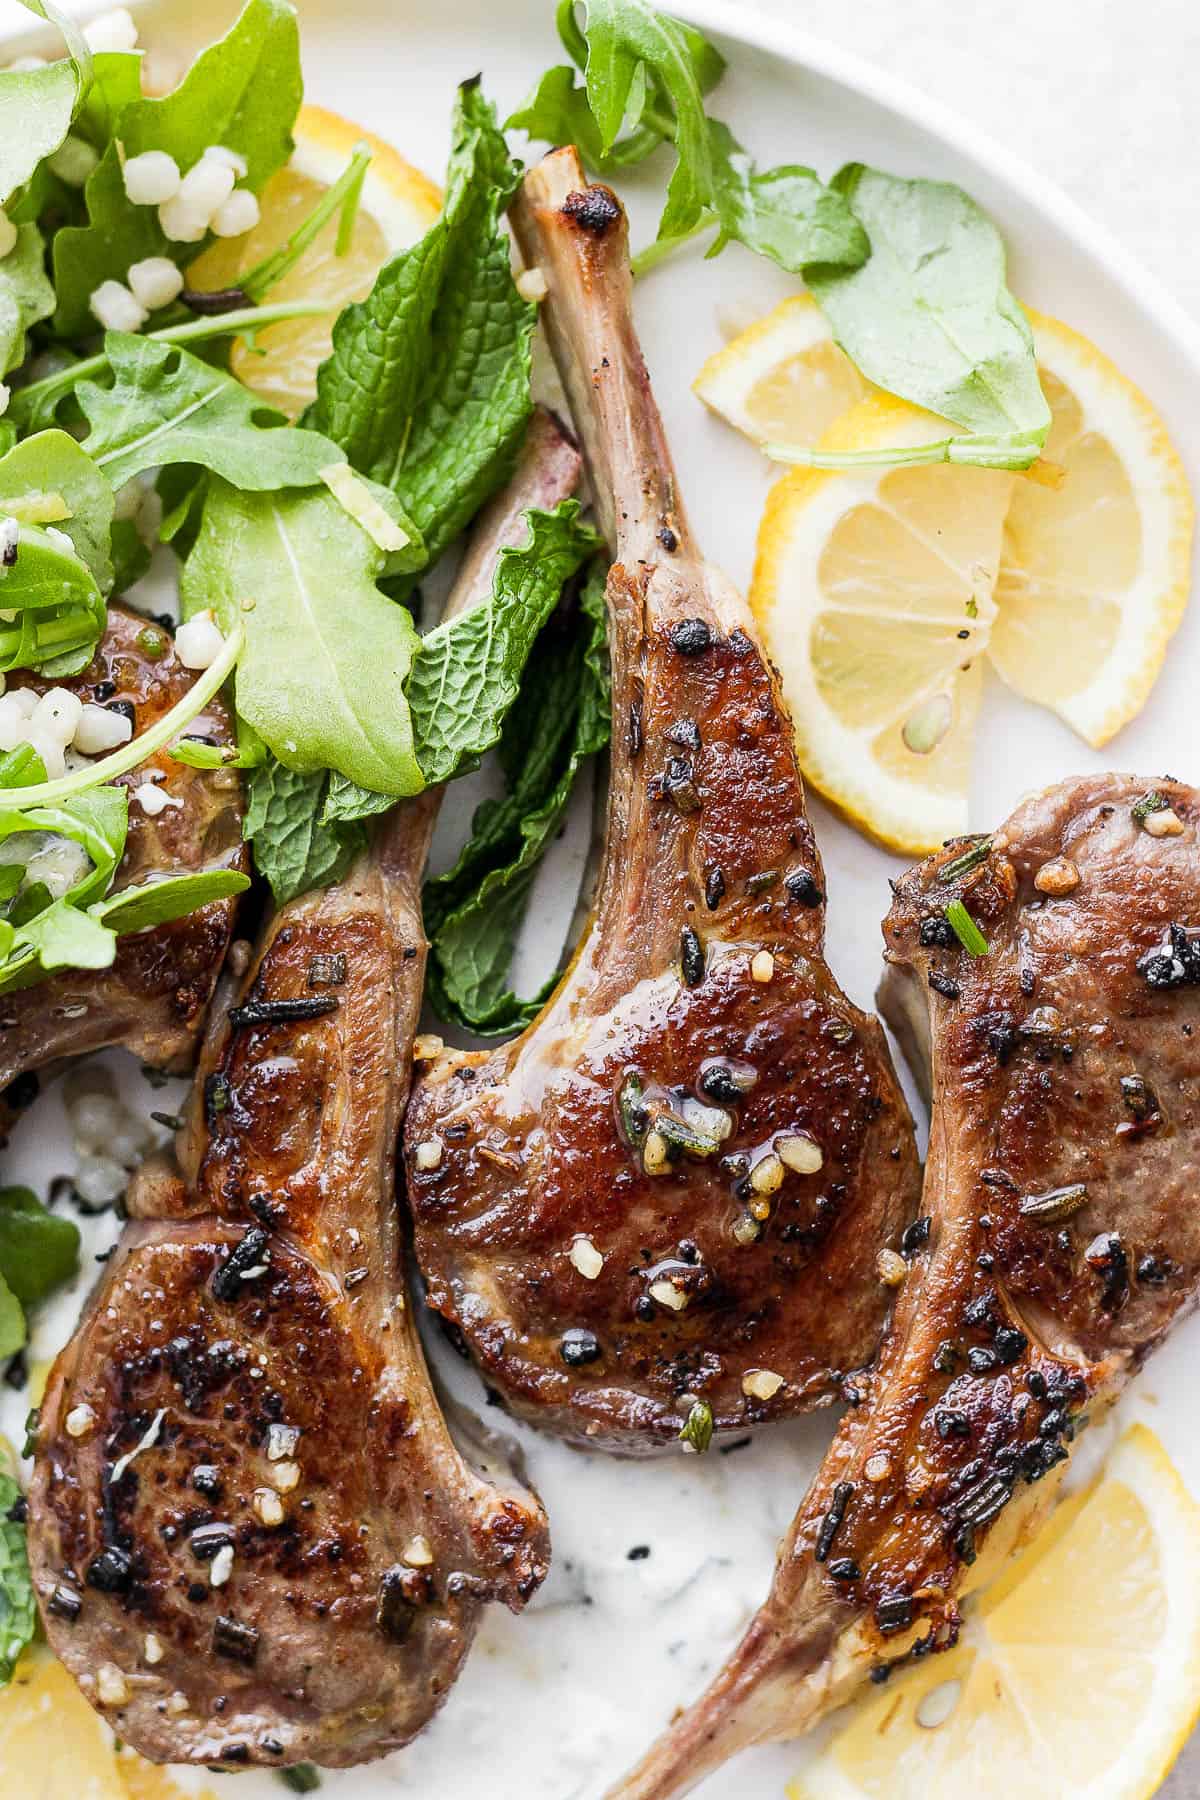 Marinated lamb chops on a plate with a salad and lemon wedges after being cooked.